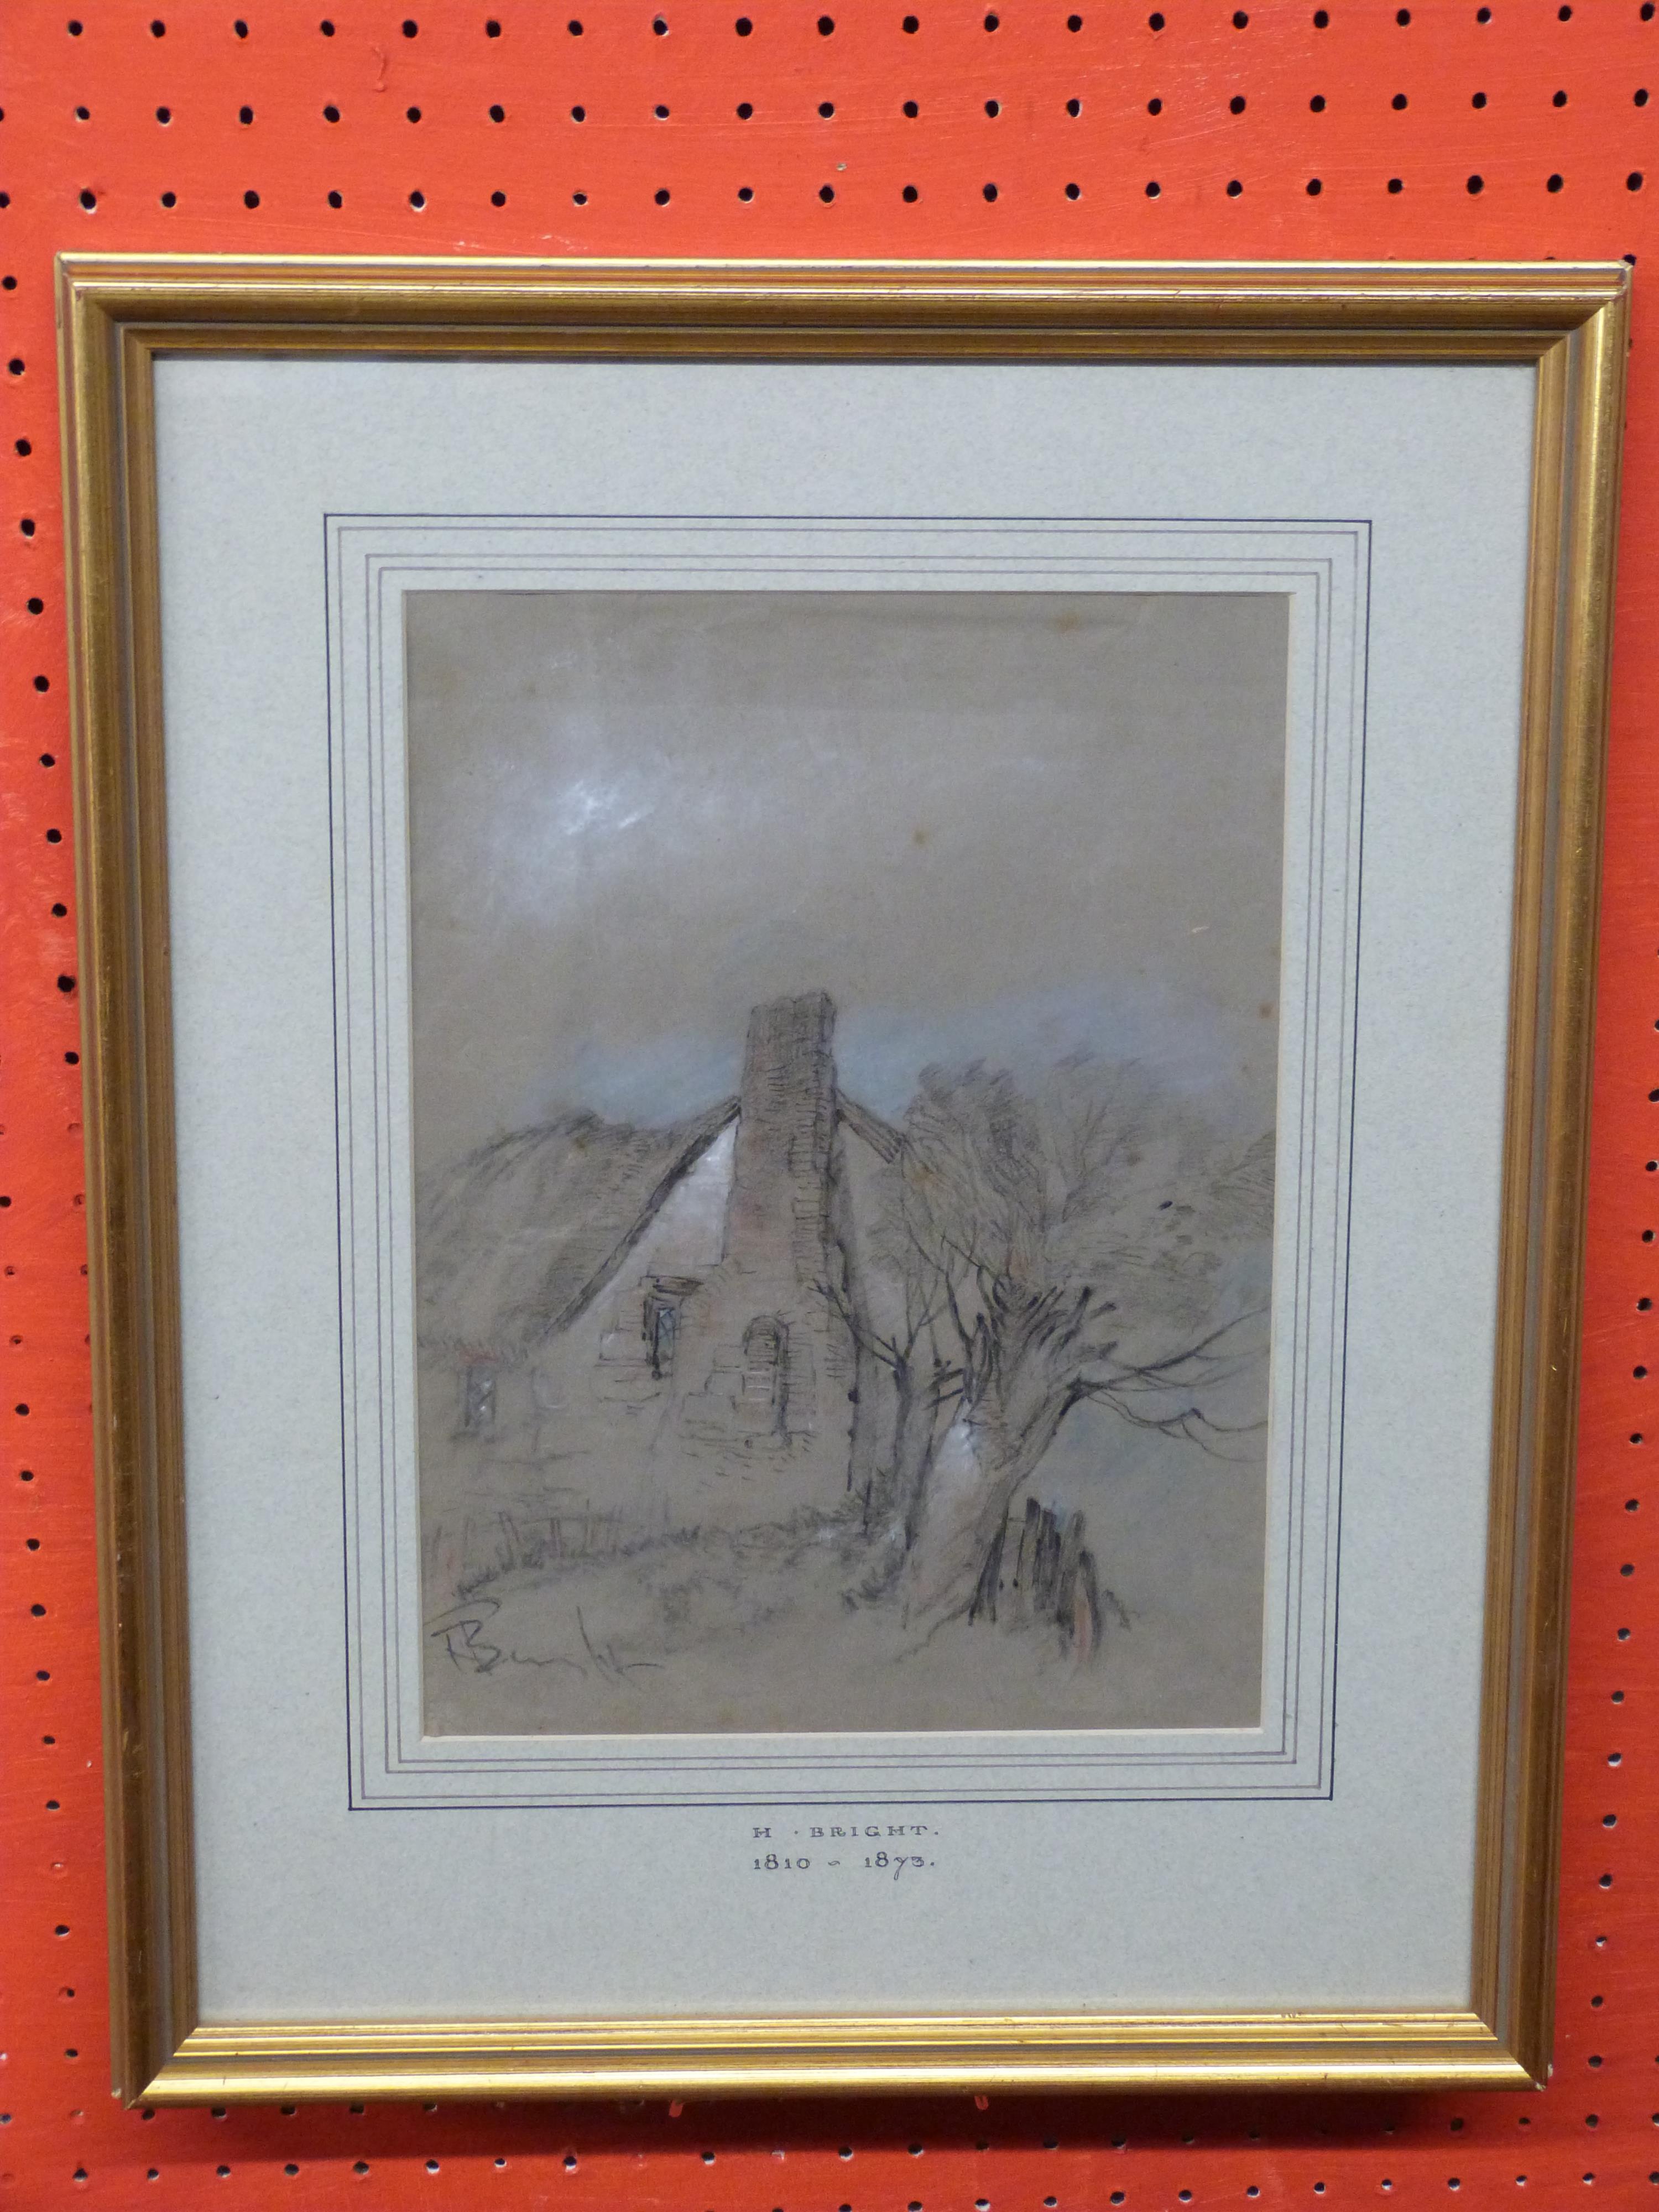 Henry Bright, signed, Cottage sketch (charcoal and chalks)